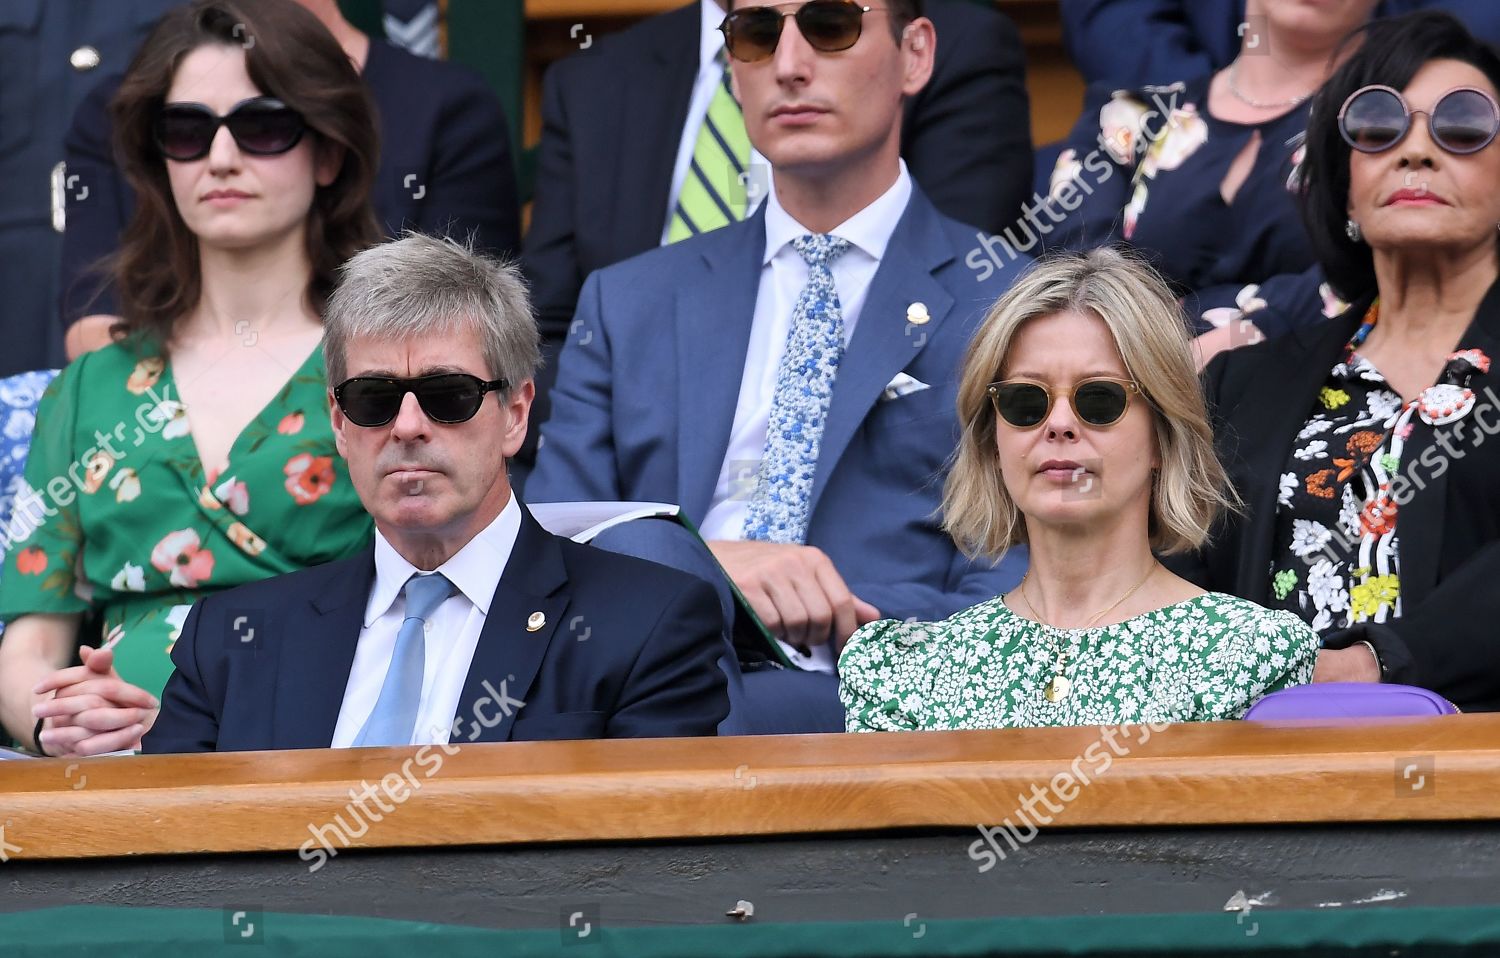 wimbledon-tennis-championships-day-9-the-all-england-lawn-tennis-and-croquet-club-london-uk-shutterstock-editorial-10331427ab.jpg